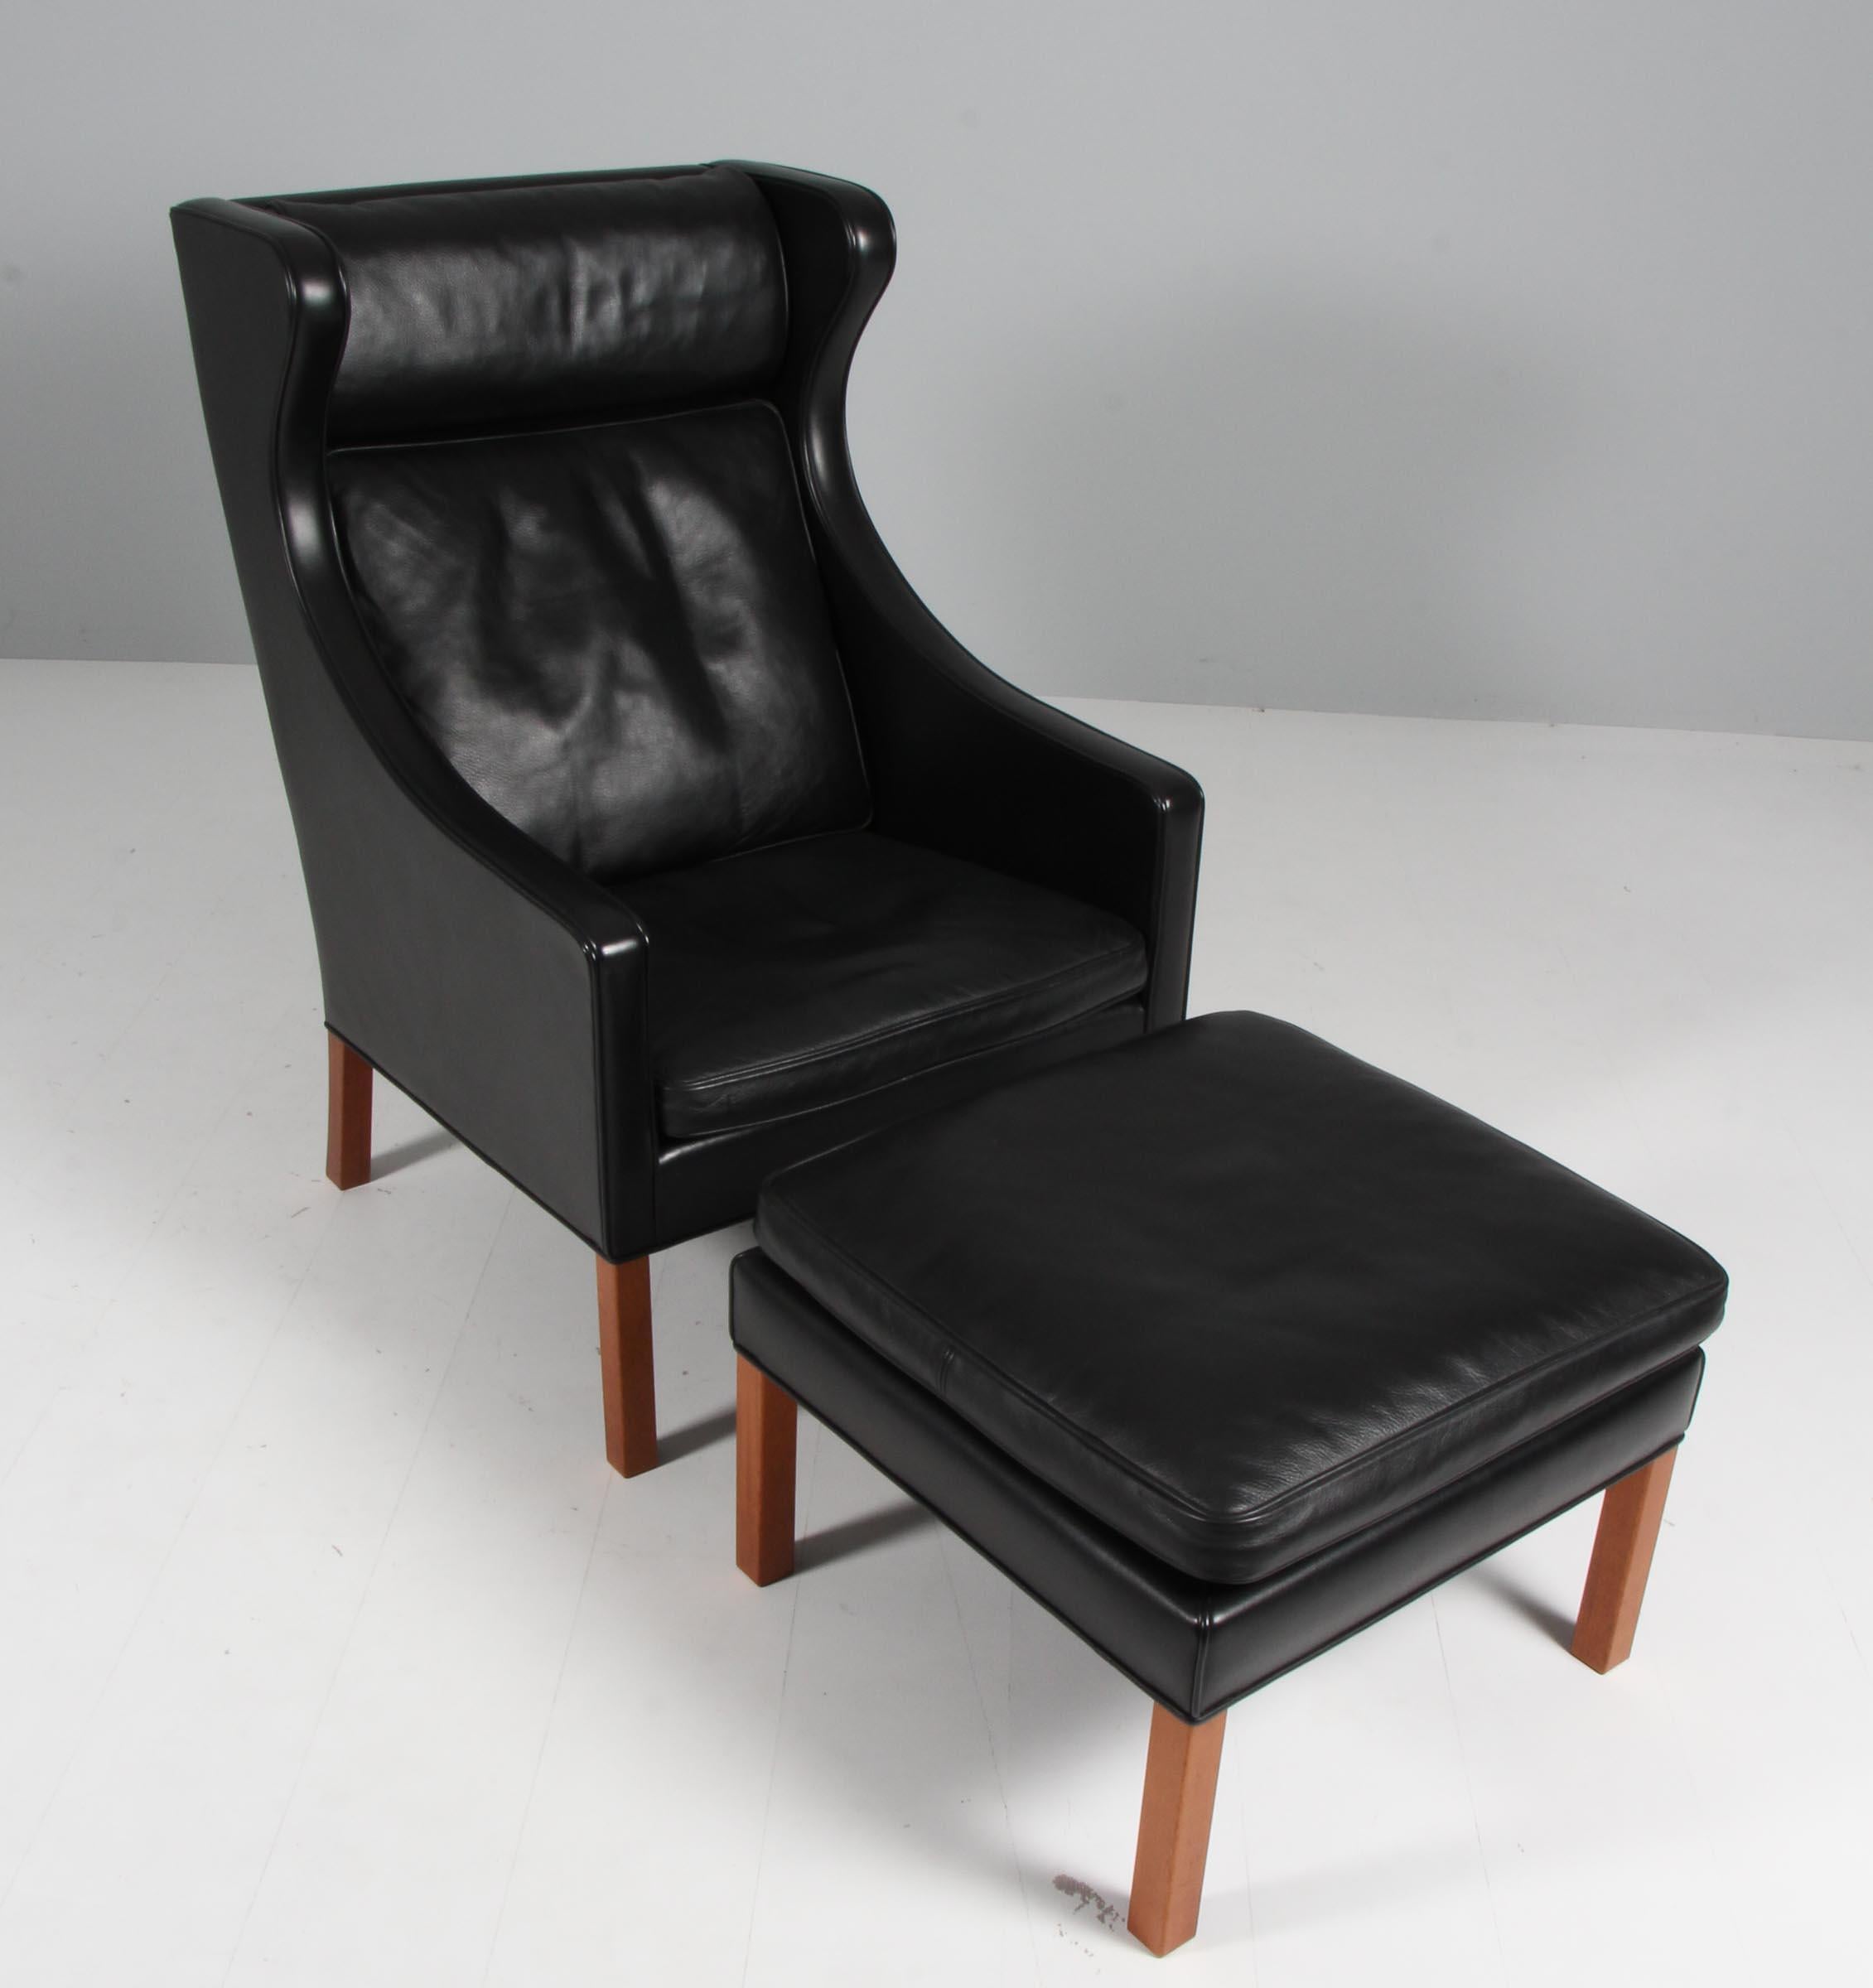 Børge Mogensen wingback chair and ottoman original upholstered with black leather.

Legs of teak.

Model 2202 and 2204, made by Fredericia Furniture.